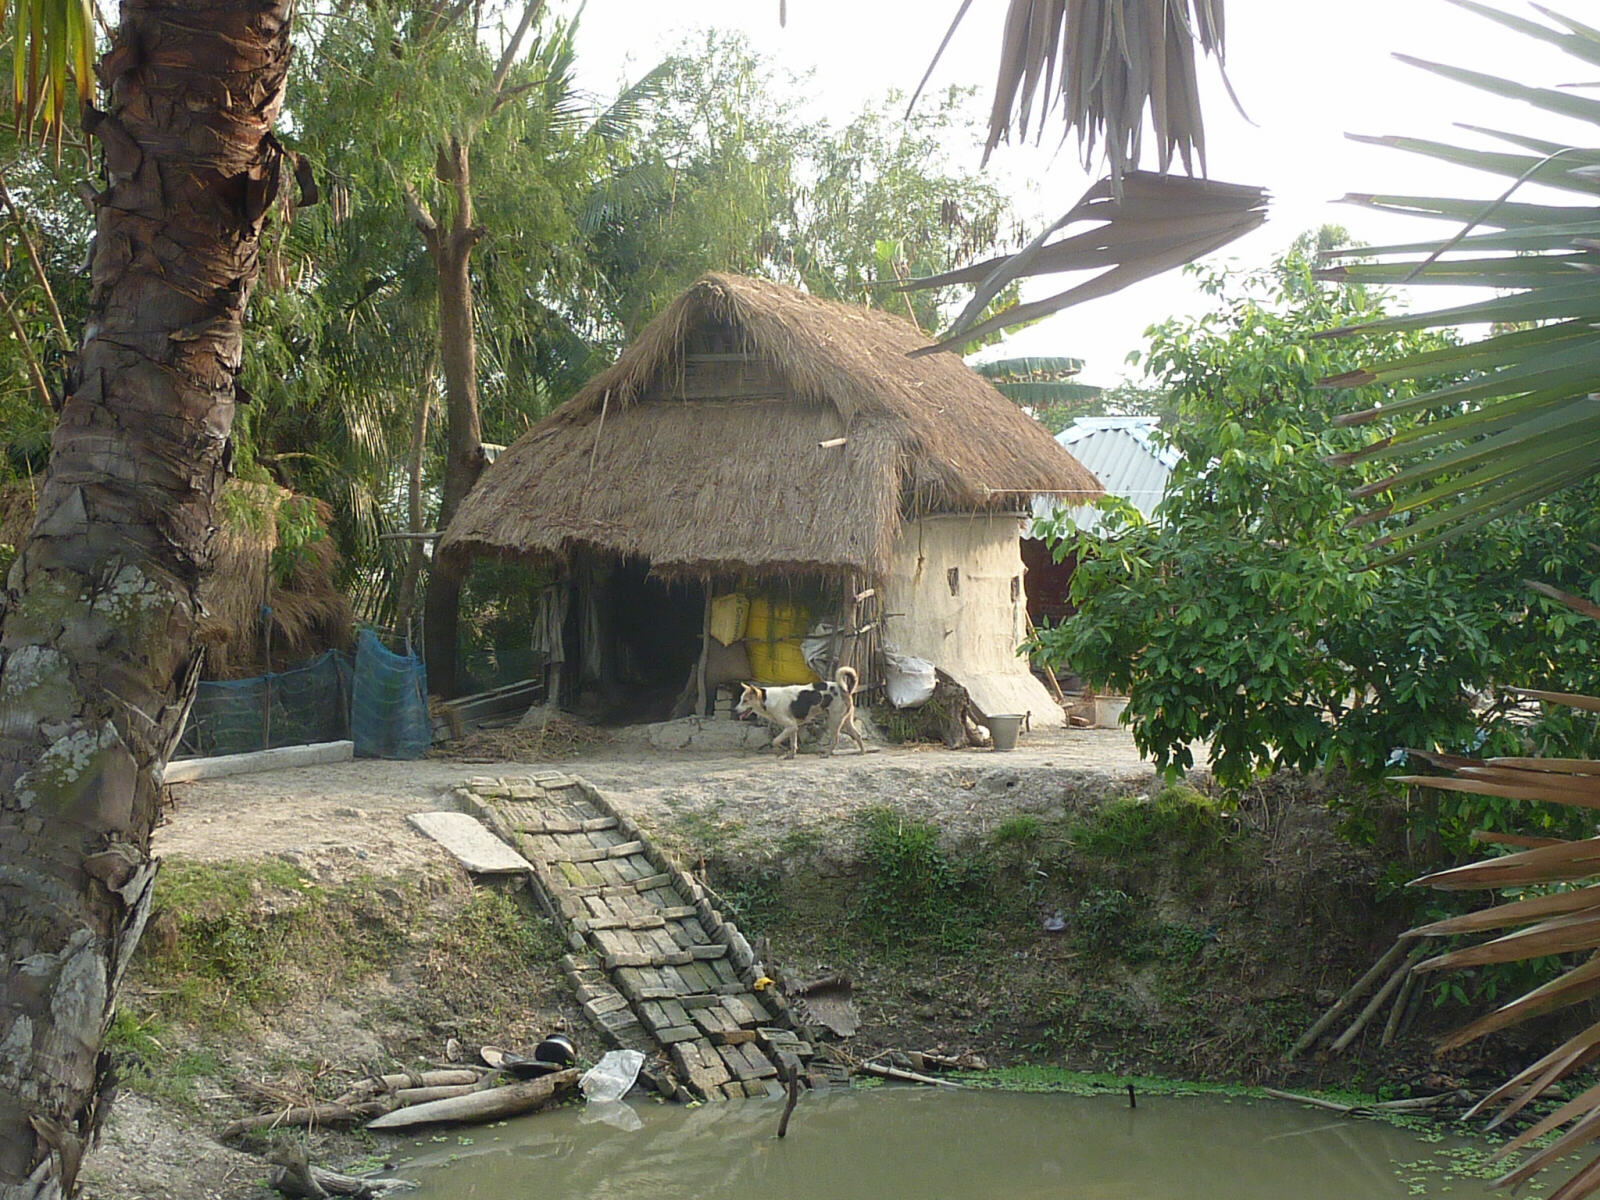 A village in the Sundarbans, West Bengal, India